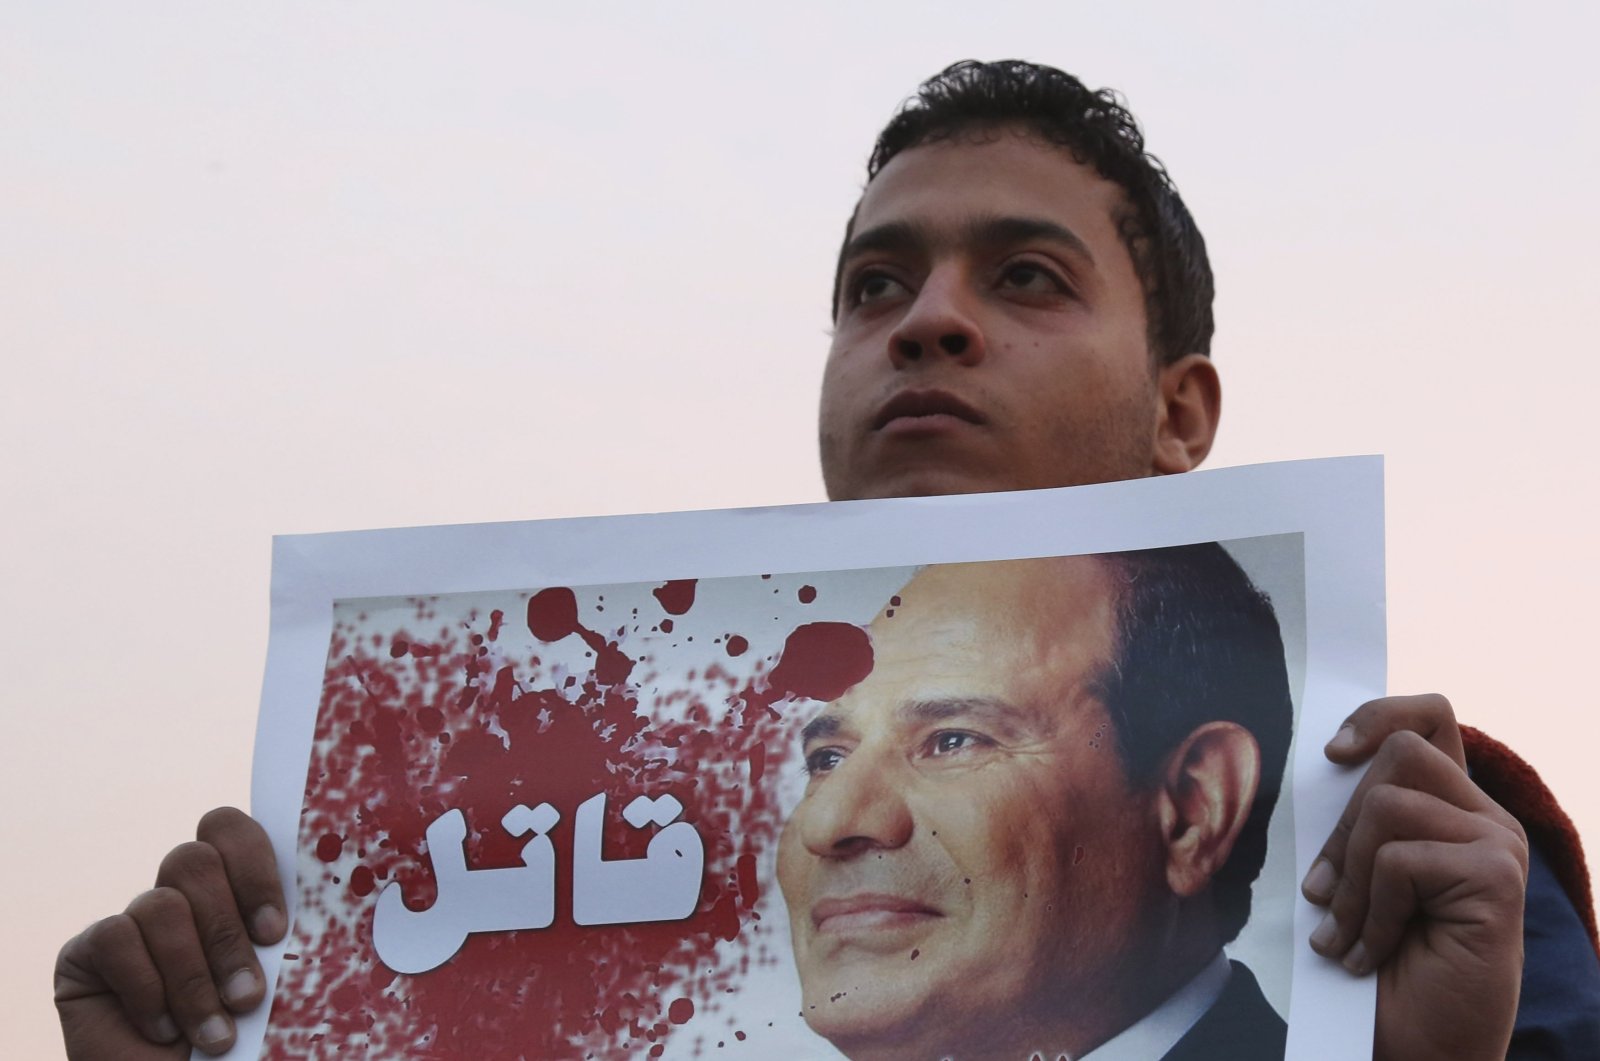 A man holds a poster of Egyptian President Abdel-Fattah el-Sissi with the word "Killer" on it during a silent protest over a bridge in Cairo, Feb. 14, 2015. (Reuters Photo)